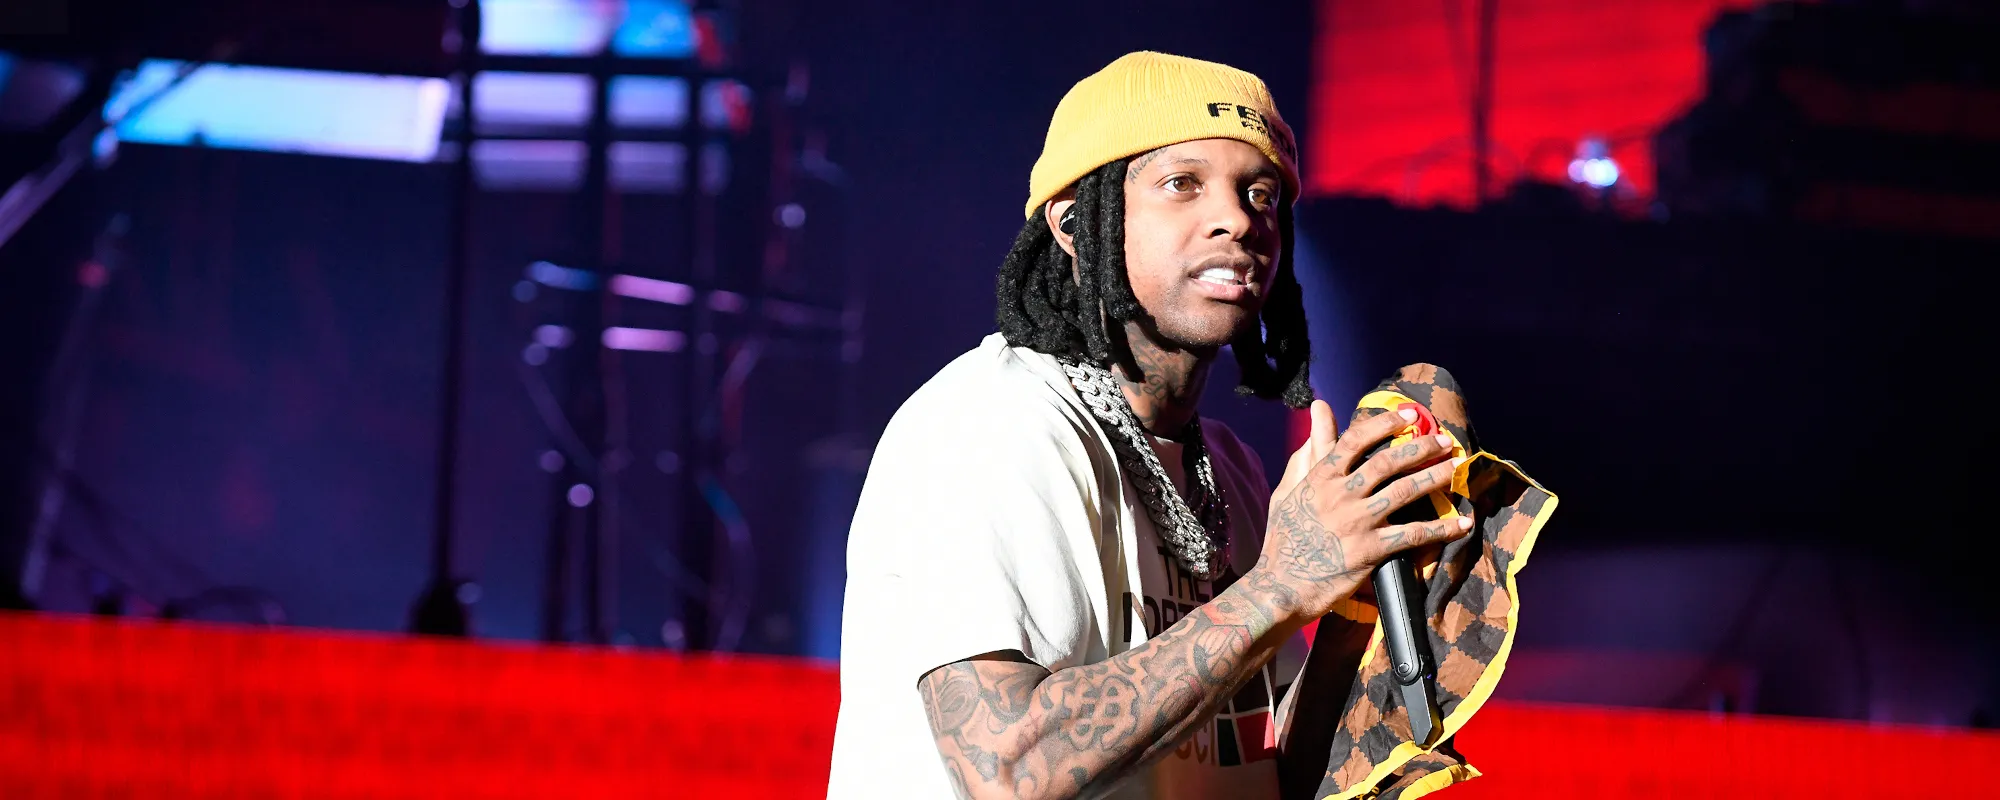 Lil Durk Teases Collab Album with Future Ahead of Solo Album